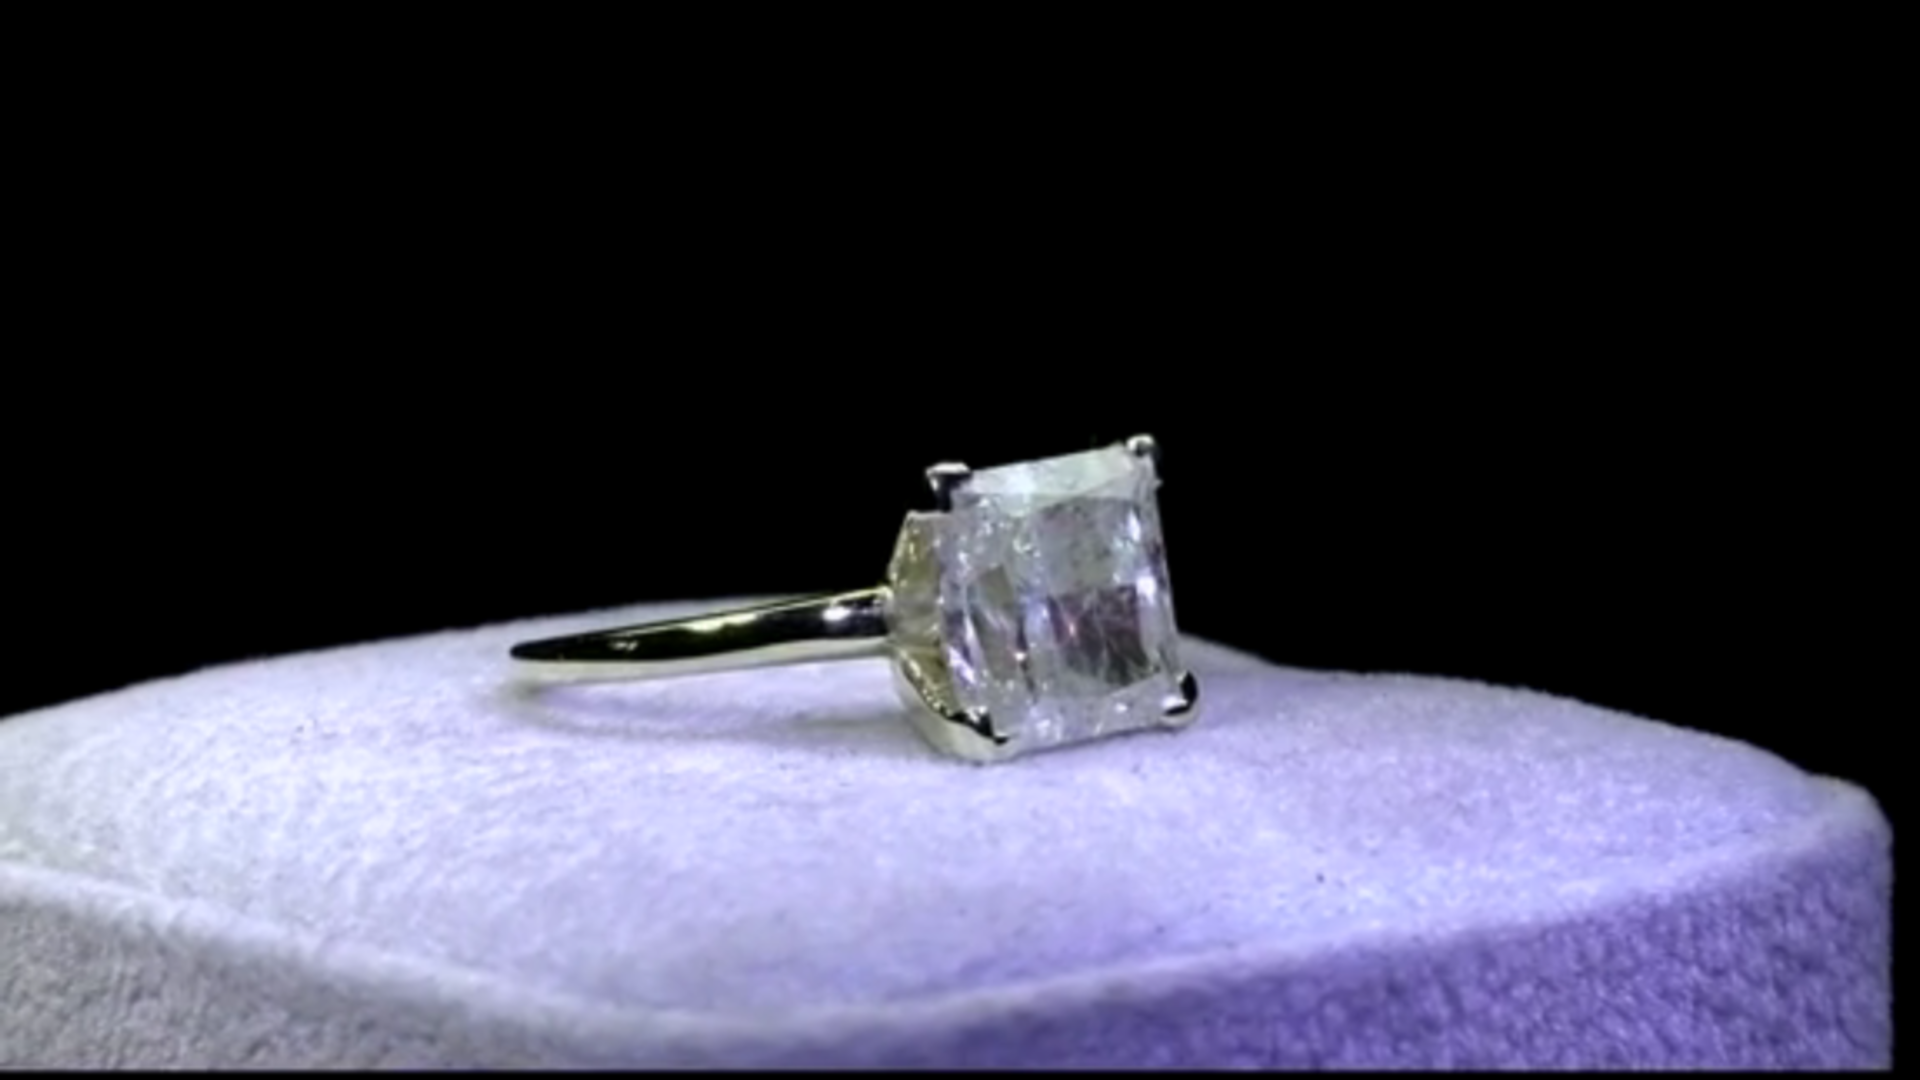 IMPRESSIVE 4.5ct PRINCESS CUT DIAMOND SOLITAIRE RING SET IN YELLOW METAL TESTED AS 14ct GOLD - Image 2 of 3